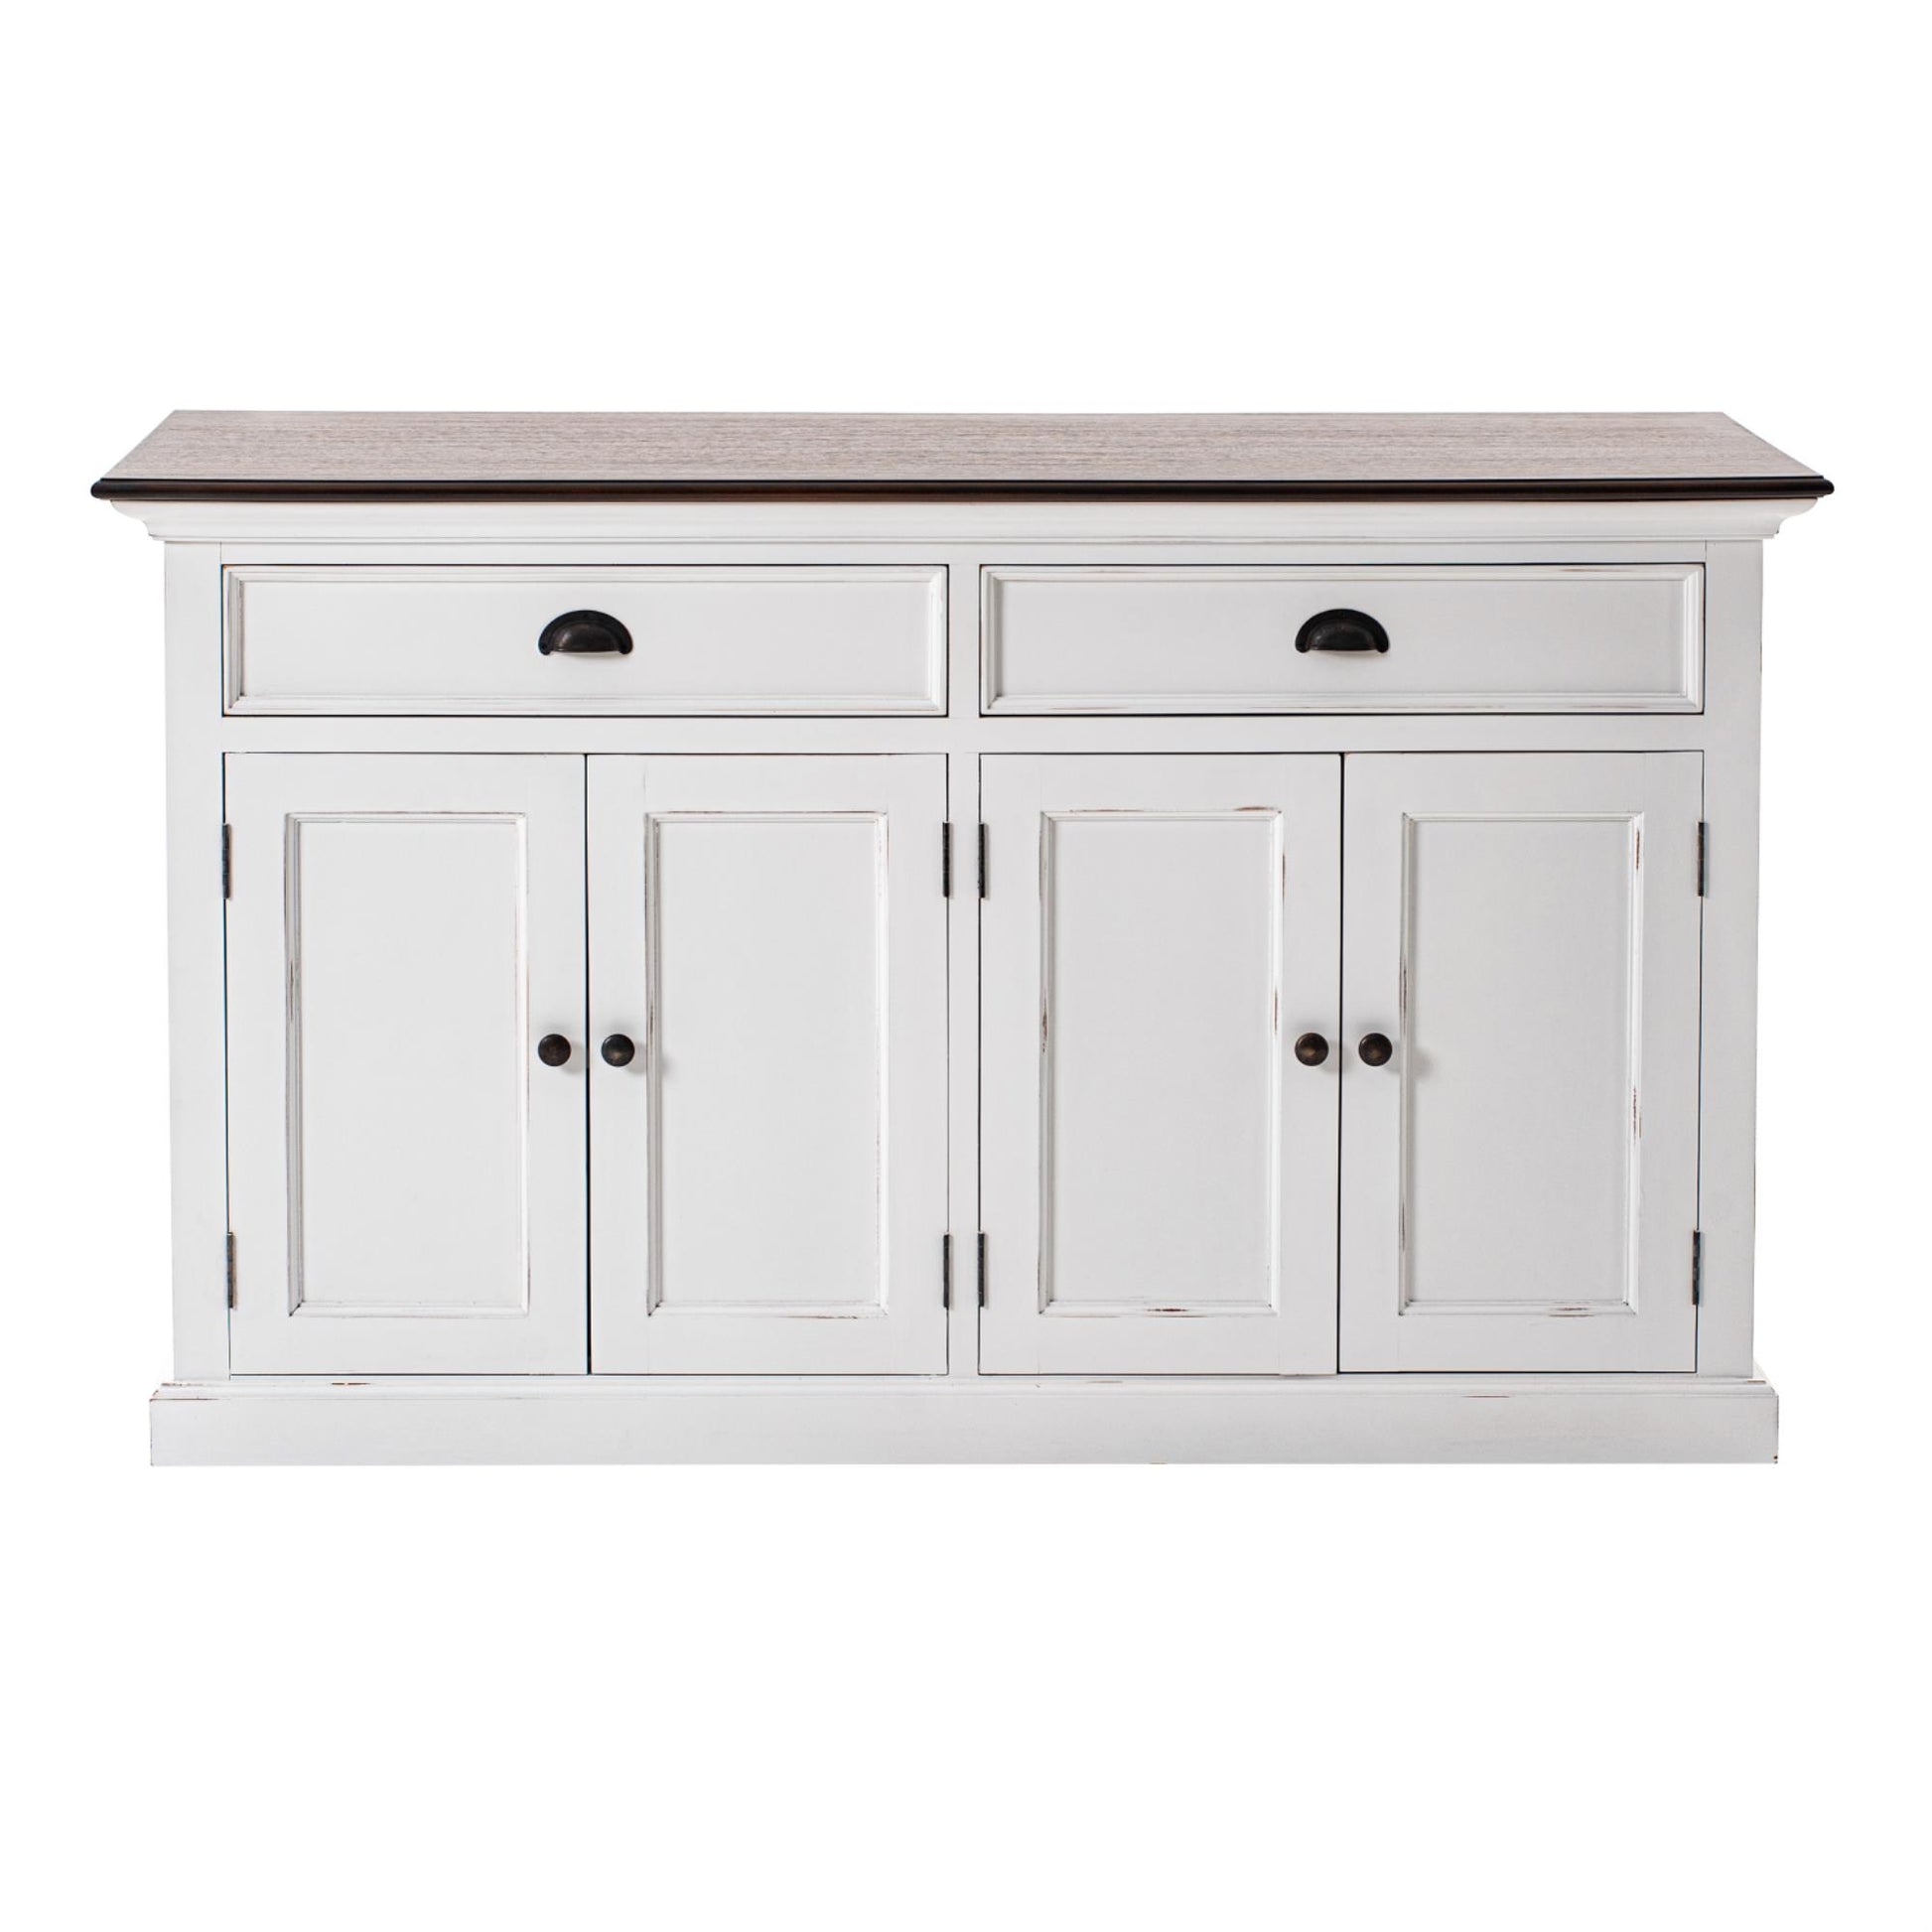 Halifax Accent collection by Nova Solo.  Classic Buffet CasaFenix